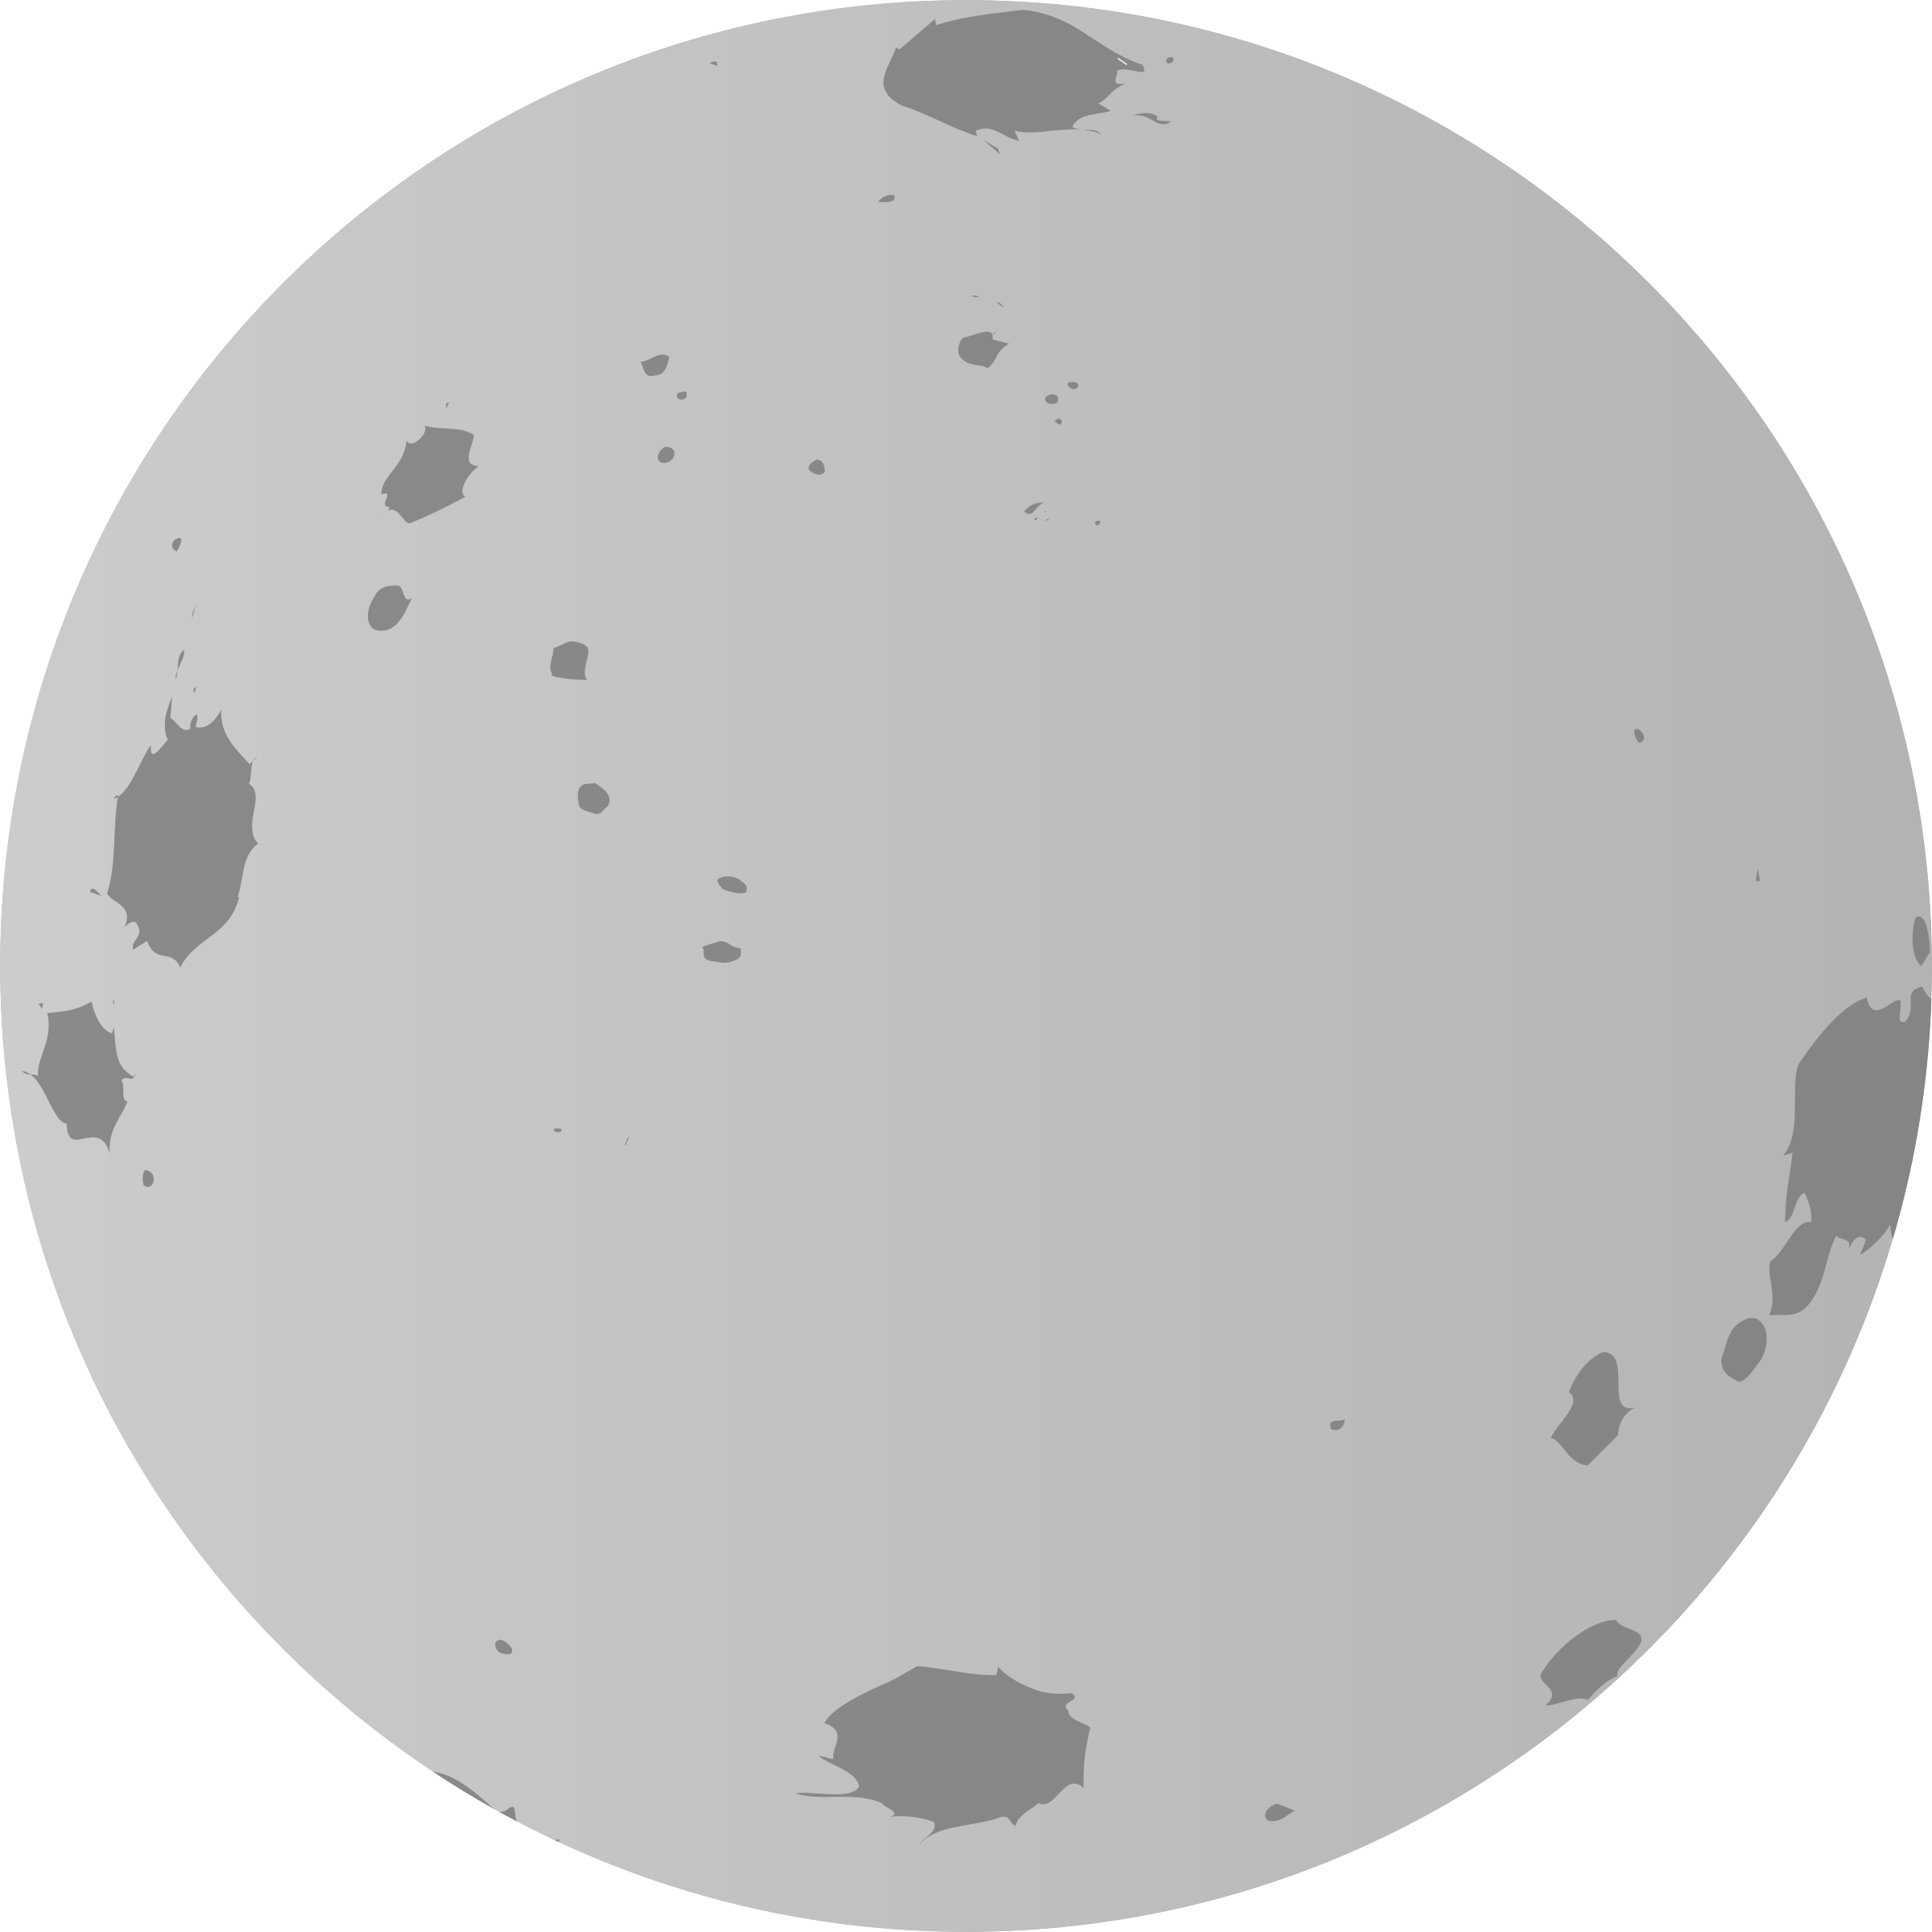 moon clipart black and white free - photo #11